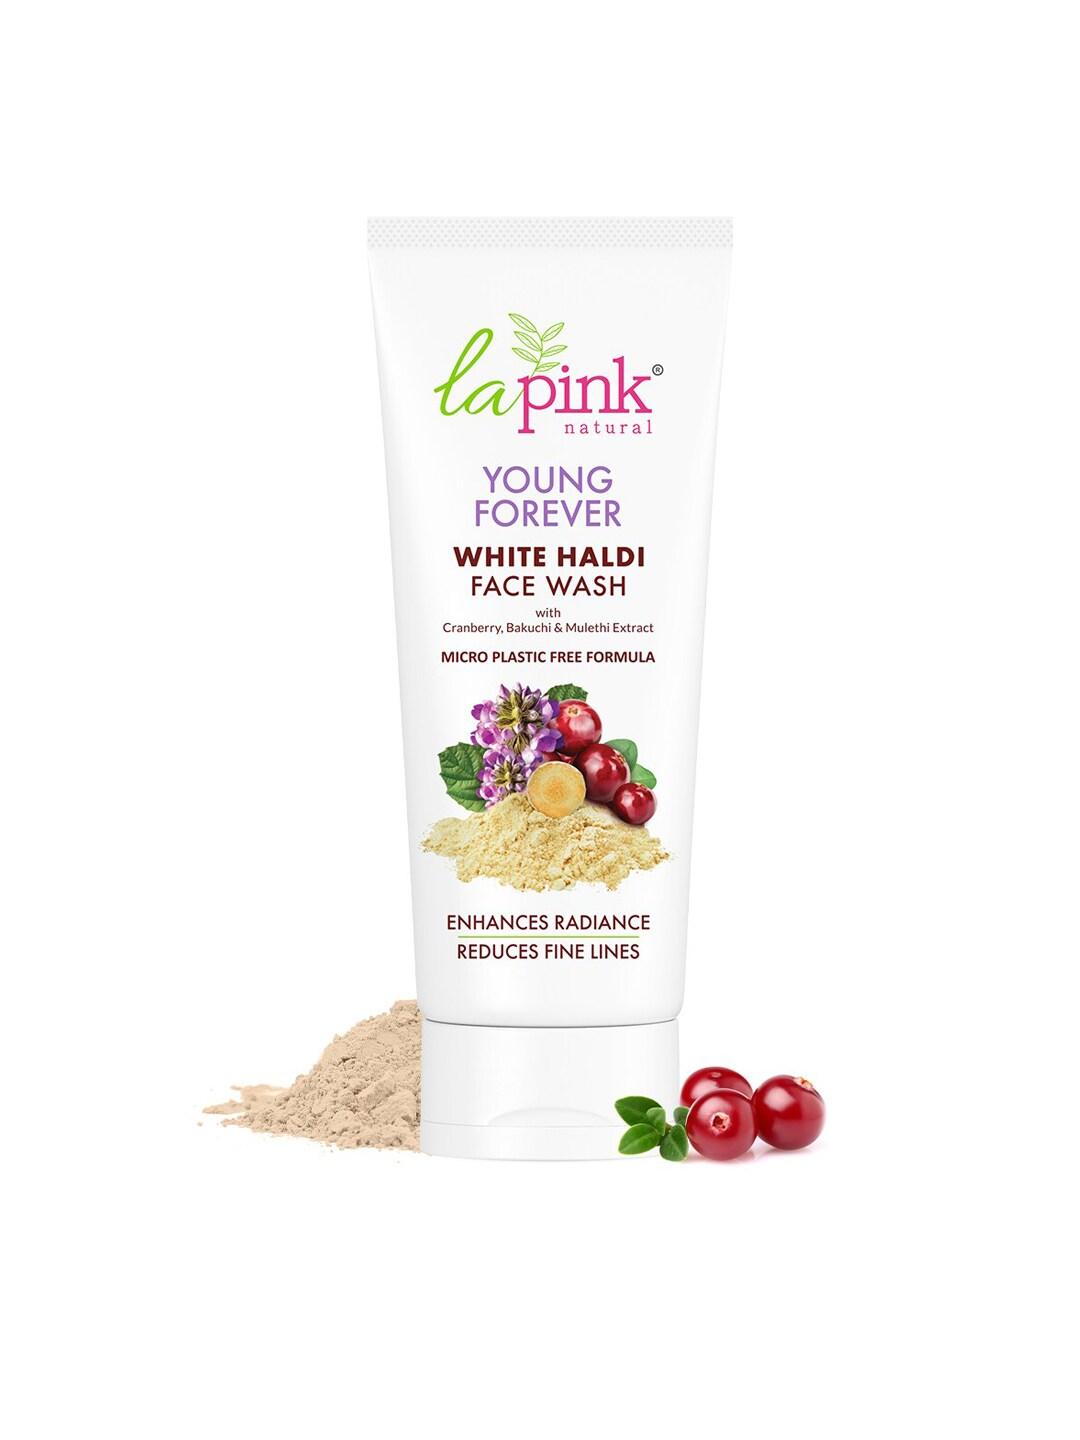 La Pink Young Forever White Haldi Face Wash - 100ml